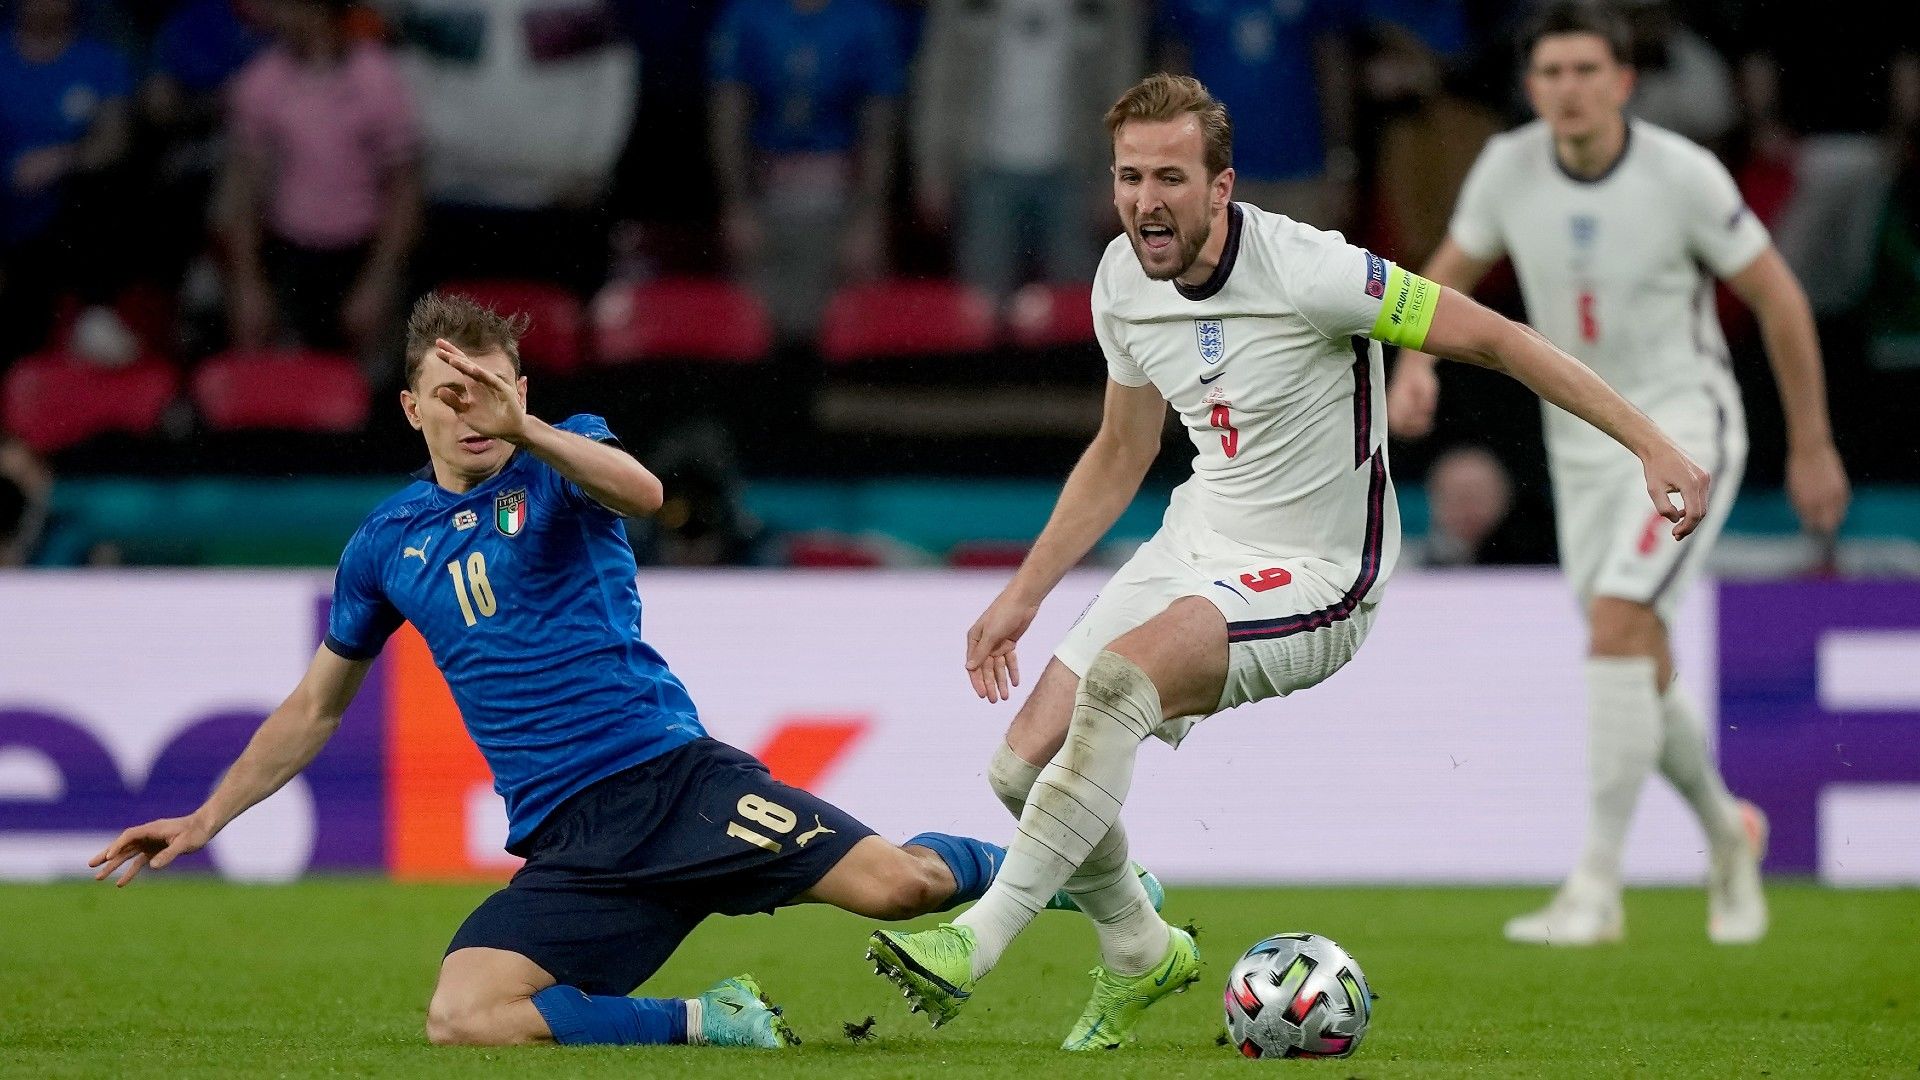 England vs Italy Match Preview, Where to Watch, Odds and Lineups | June 11